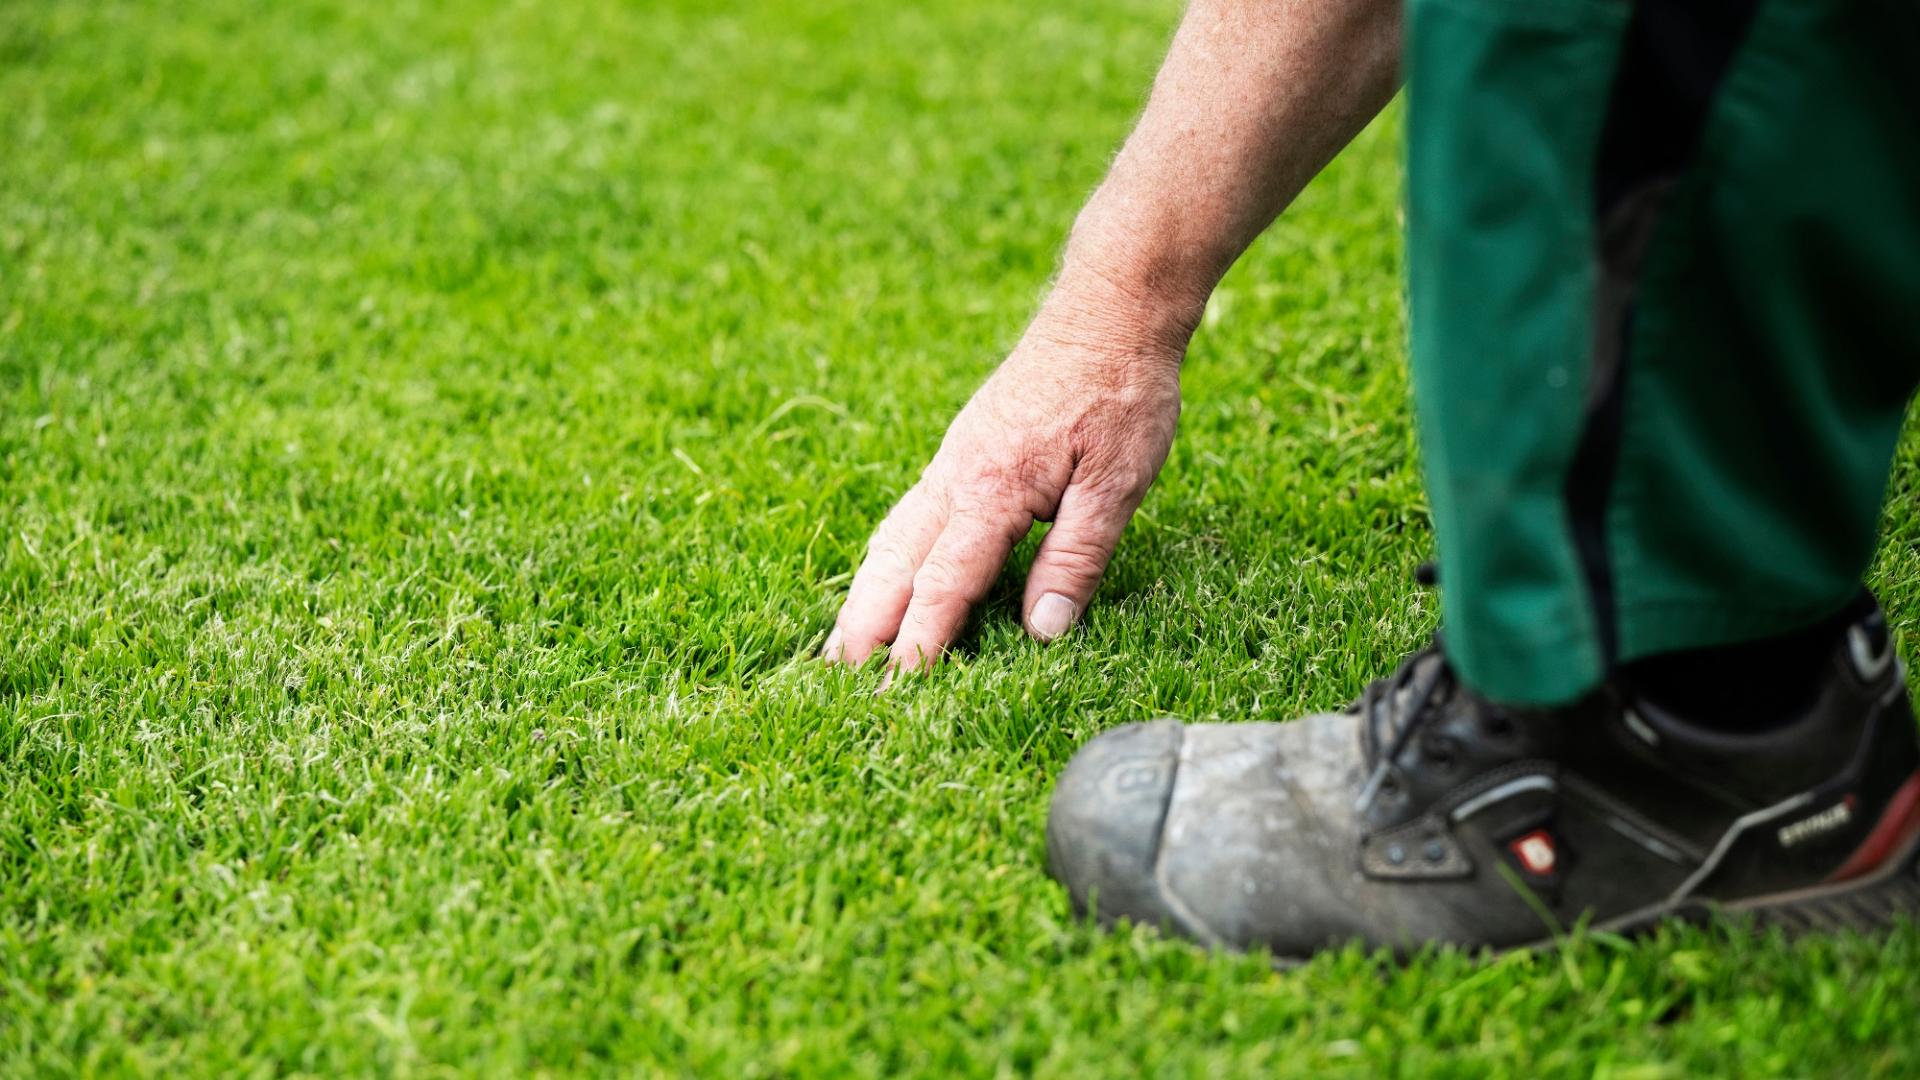 The road to turf sustainability